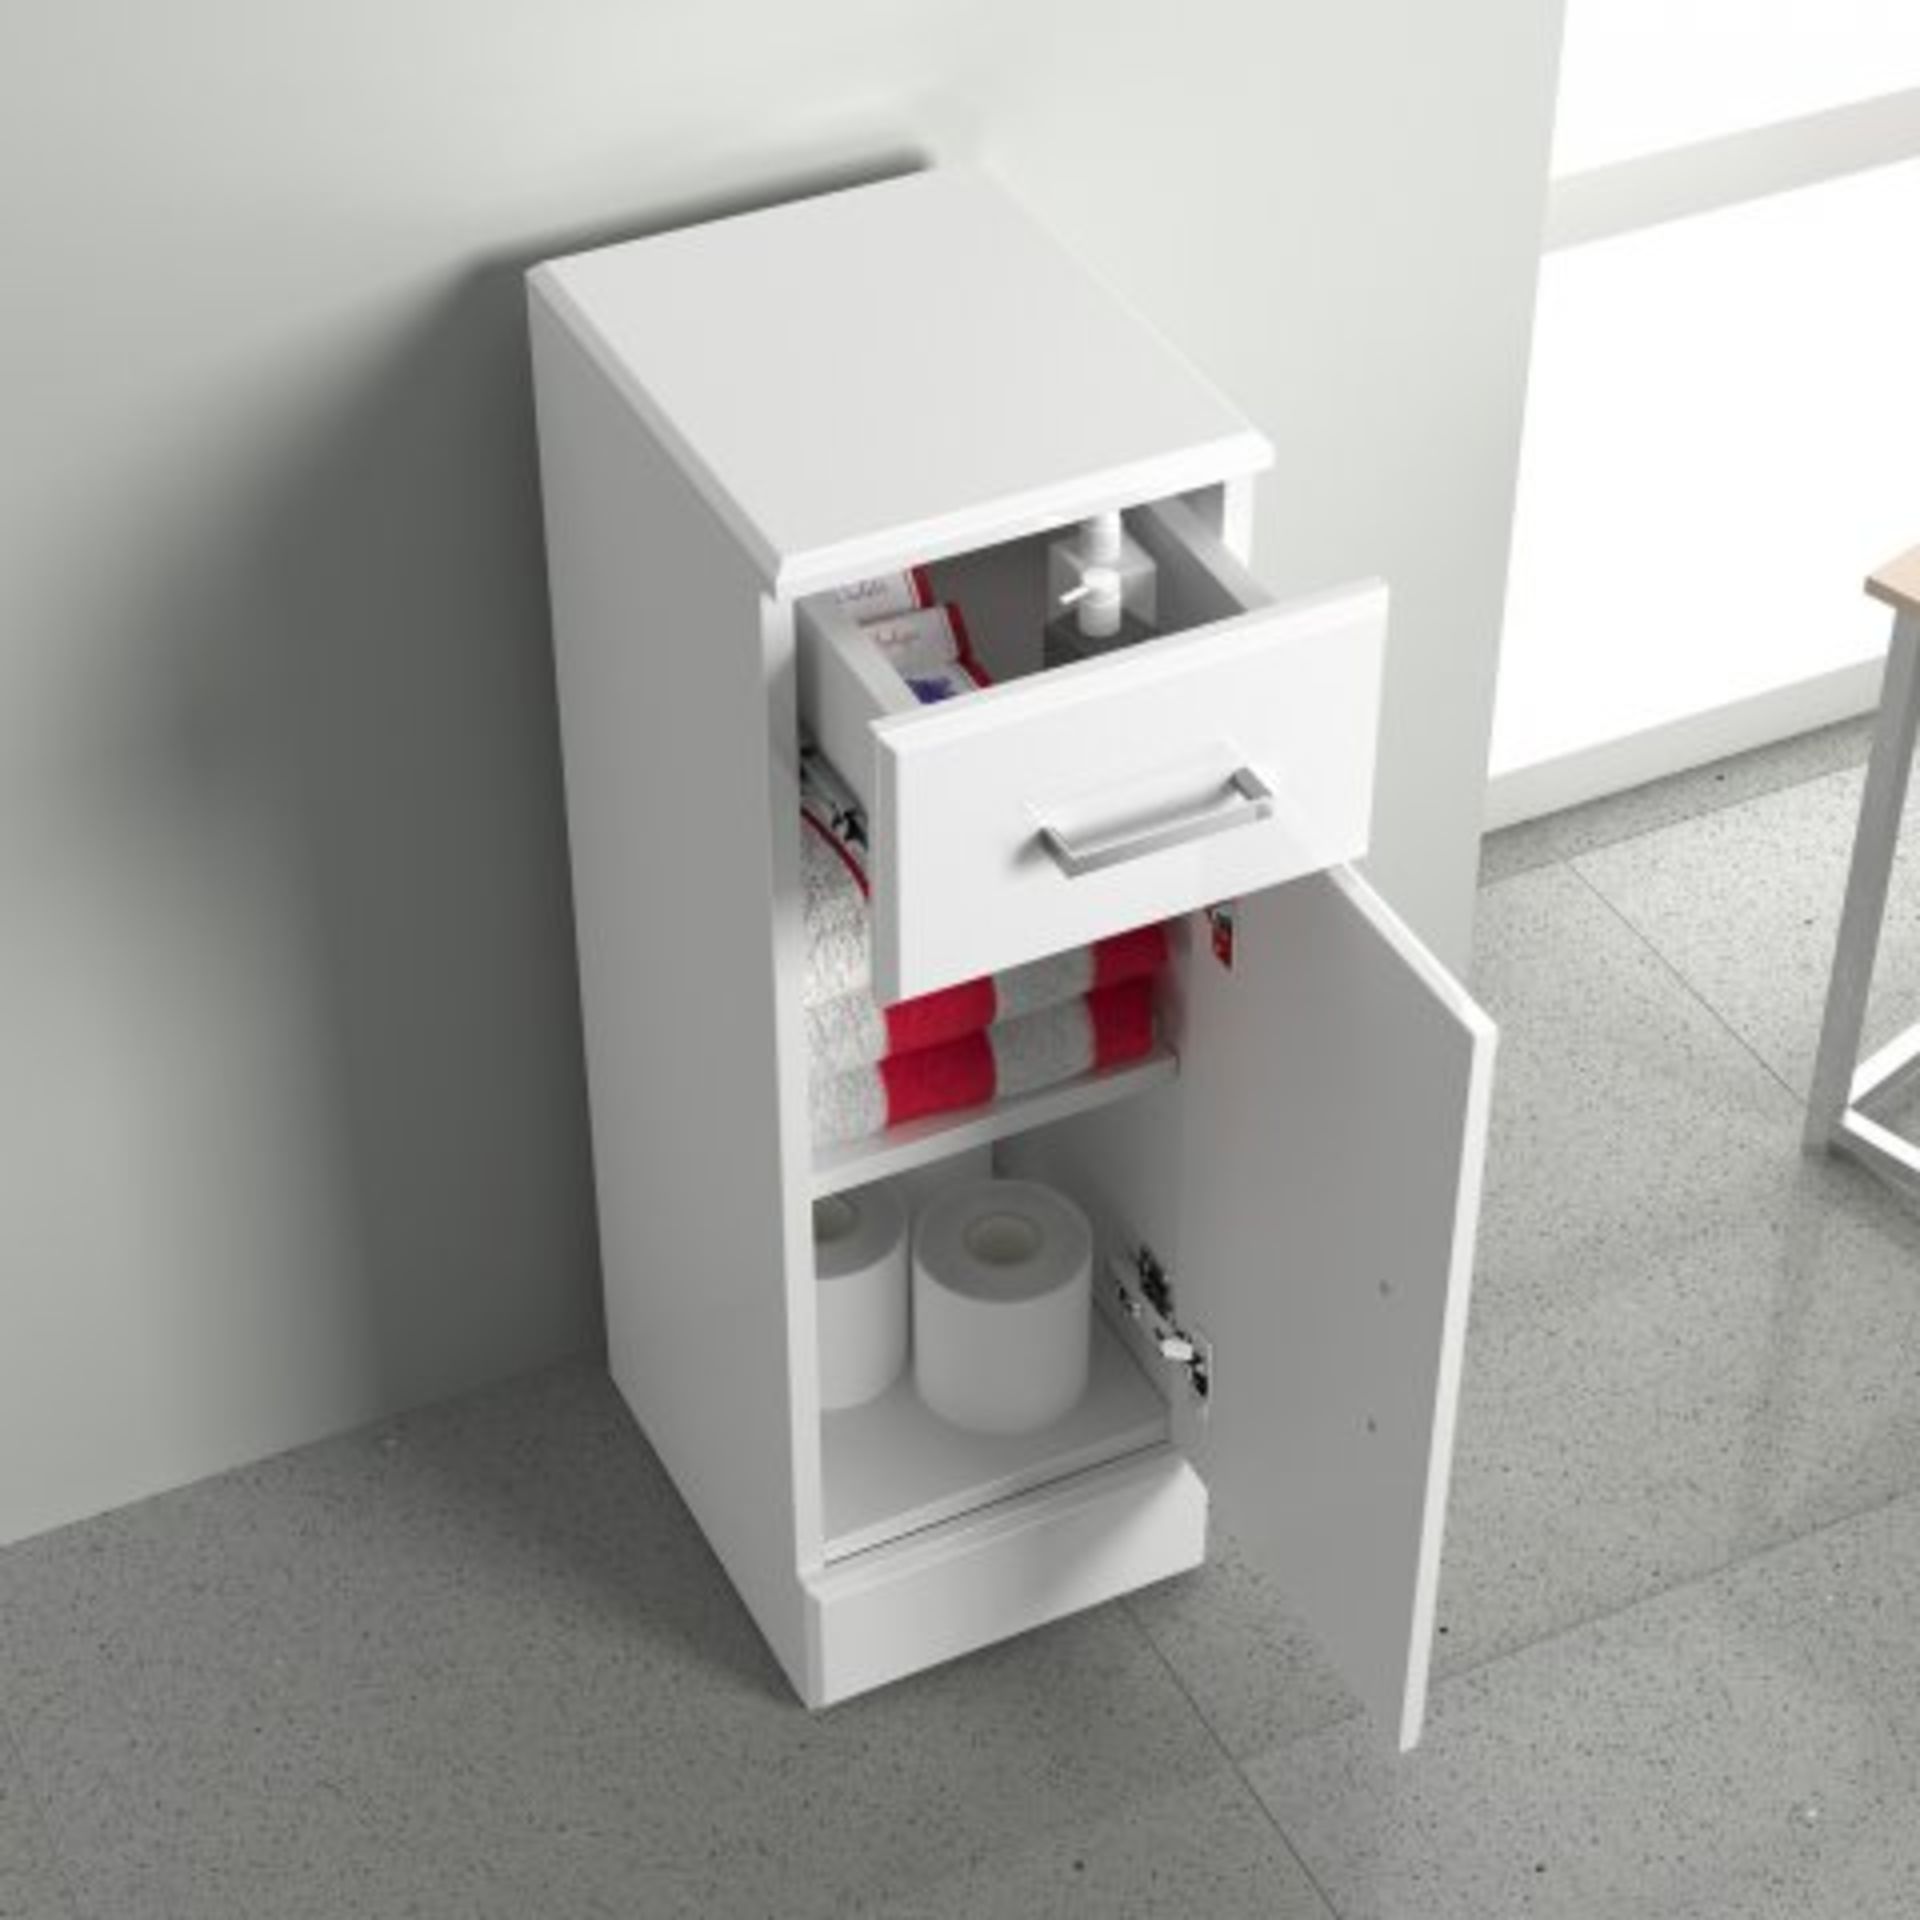 (A133) 250x330mm Quartz Gloss White Small Side Cabinet Unit. RRP £143.99. This state-of-the-art